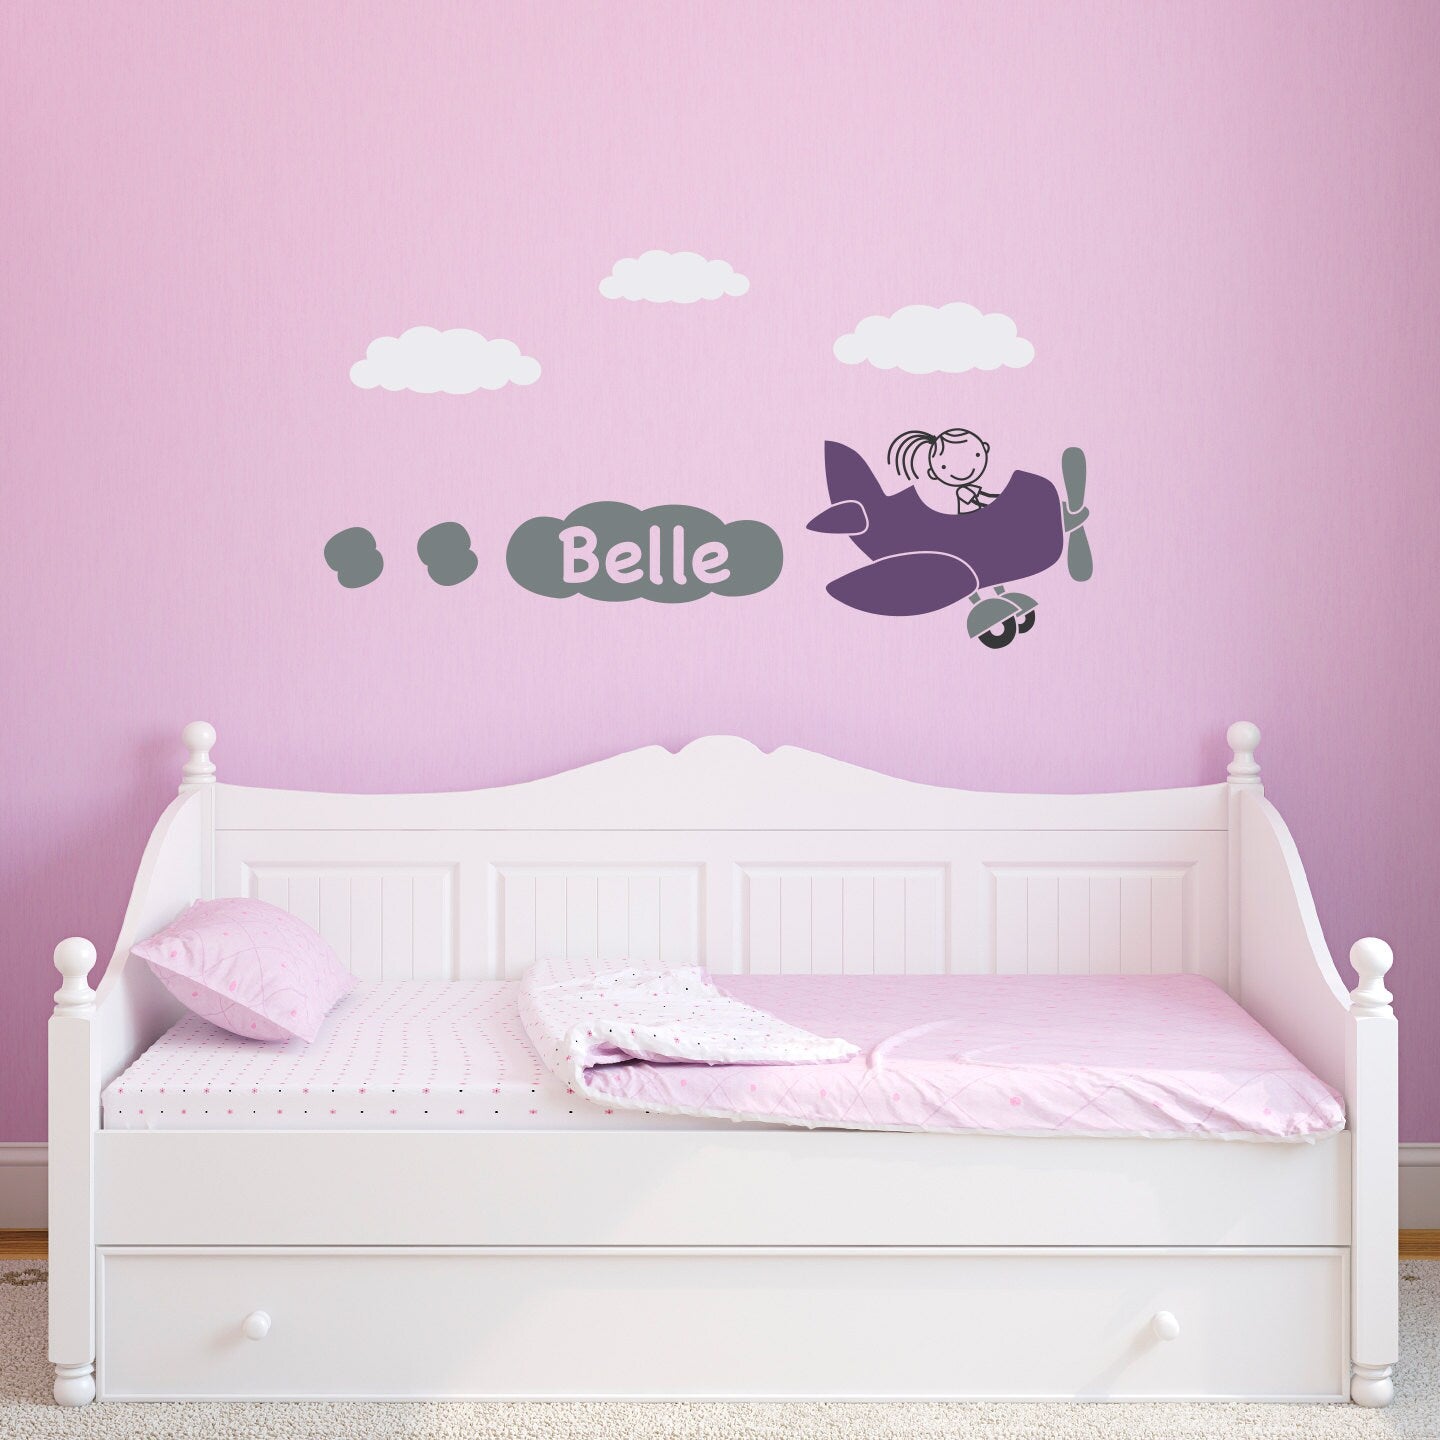 Airplane Wall Decal with Girls Personalized Name - Plane Wall Sticker - Bedroom Decal - Children Wall Decals